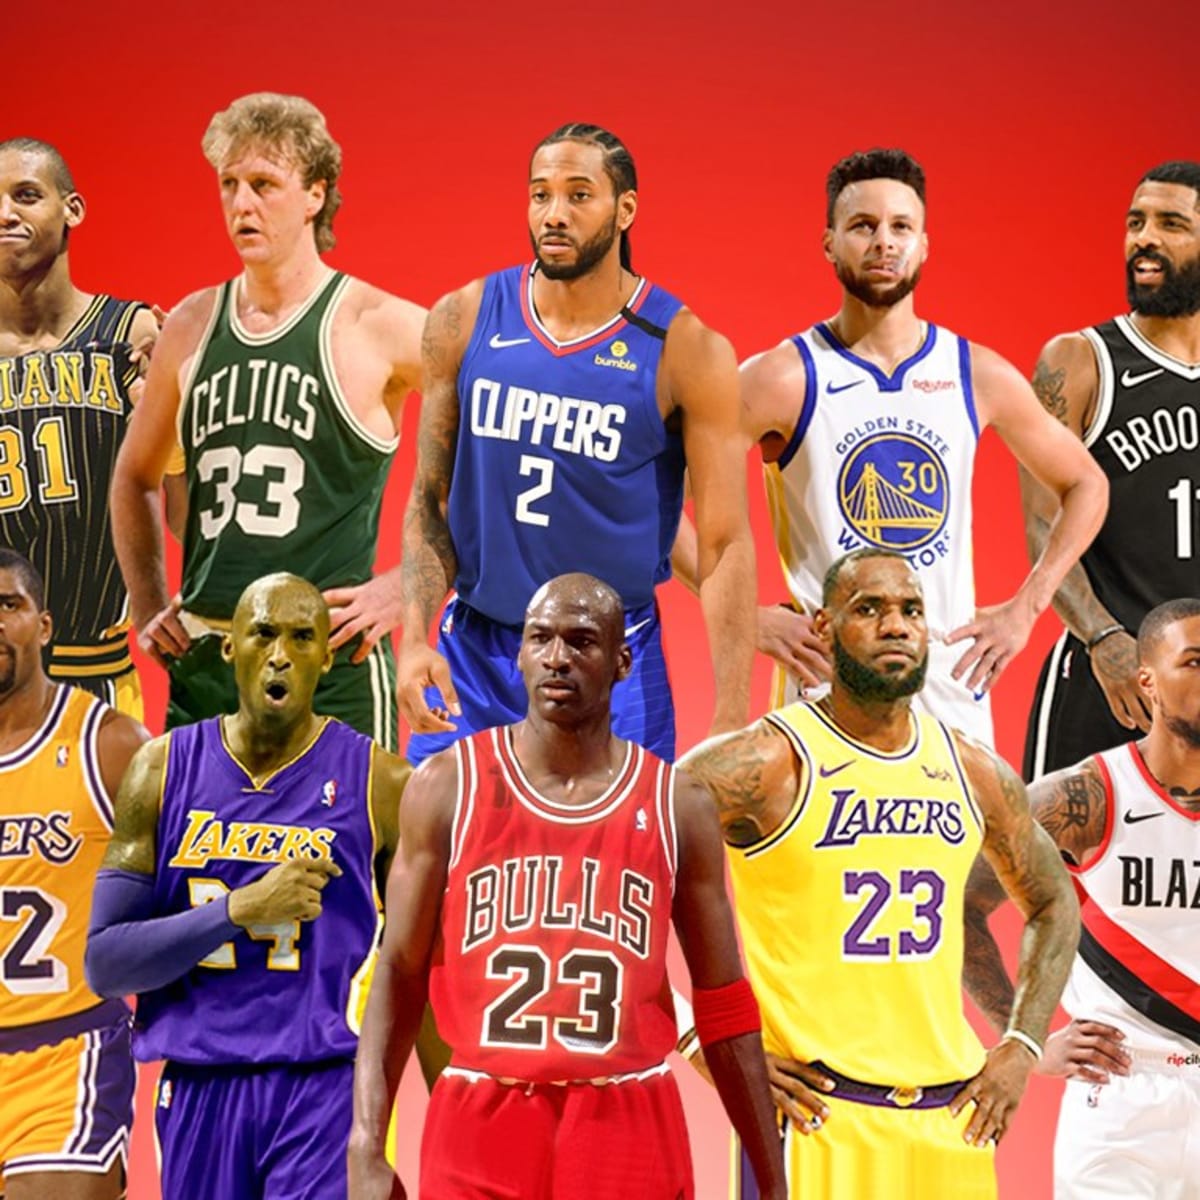 Kobe Bryant Ranked 14th in List of Greatest NBA Players of All Time